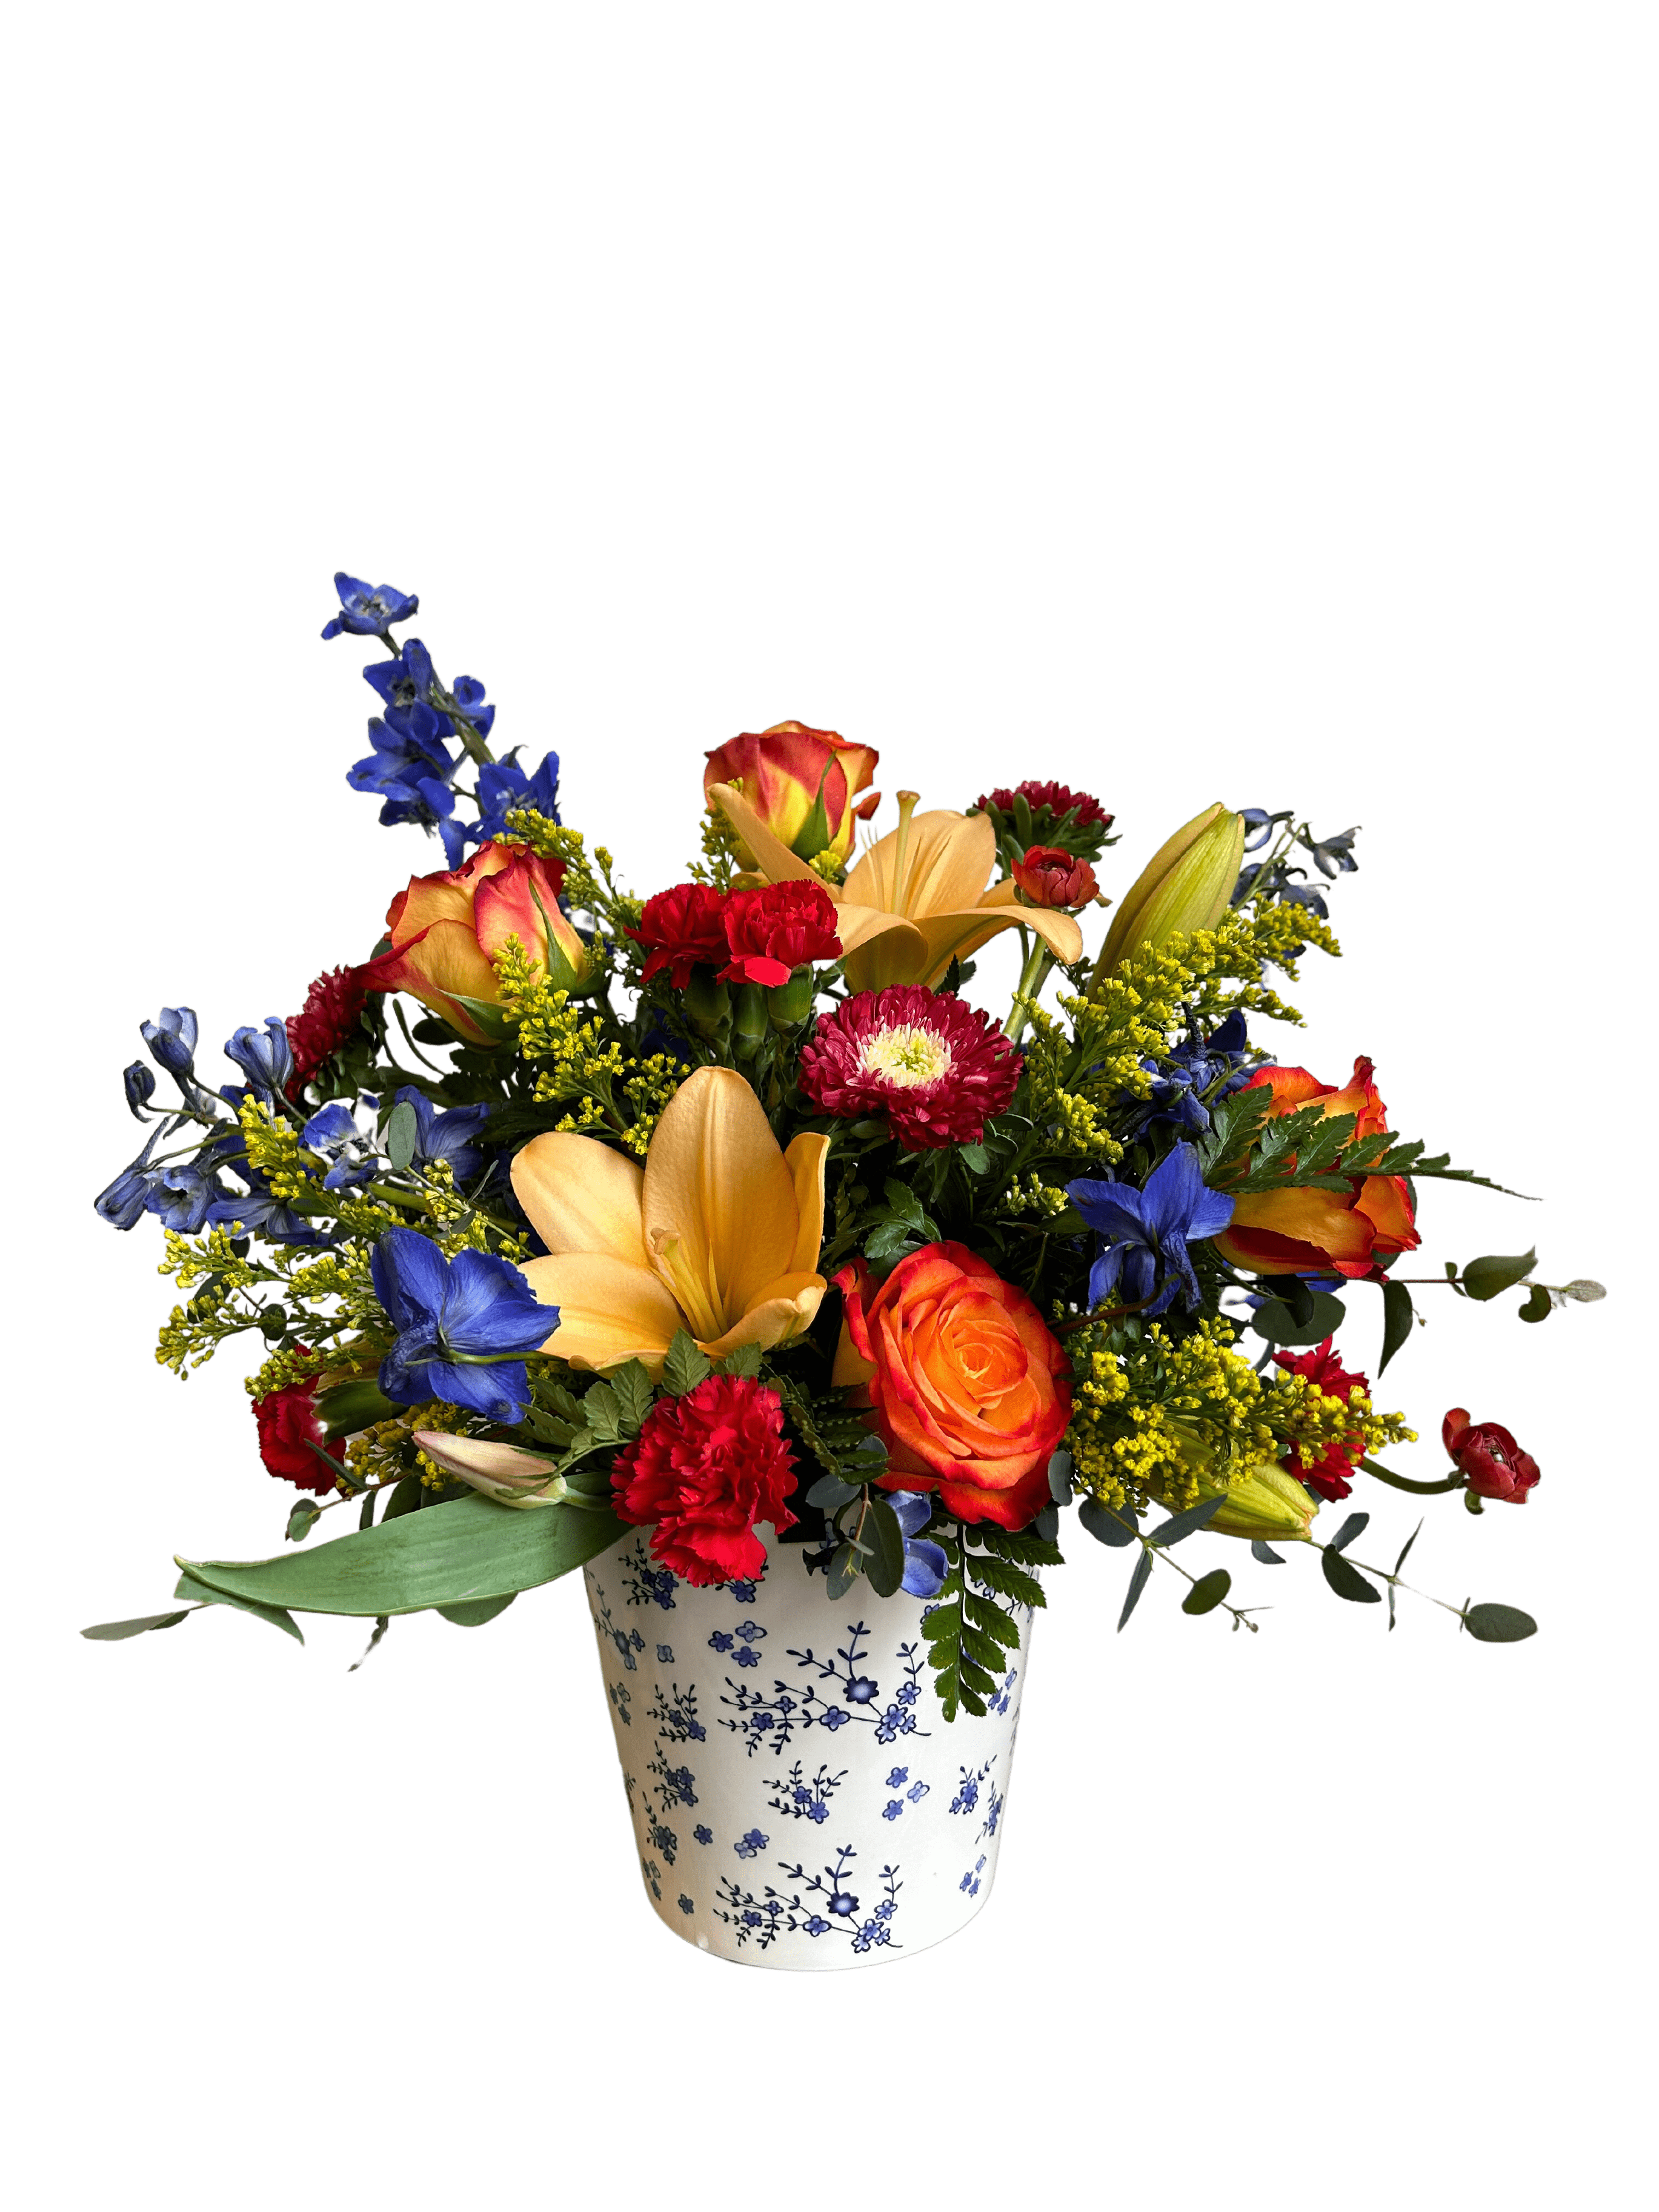 Mamma Mia - A beautiful Blue and White Ceramic container filled with bright blooms of delphinium, roses, carnations, lilies, matsumoto asters and a variety of beautiful greenery